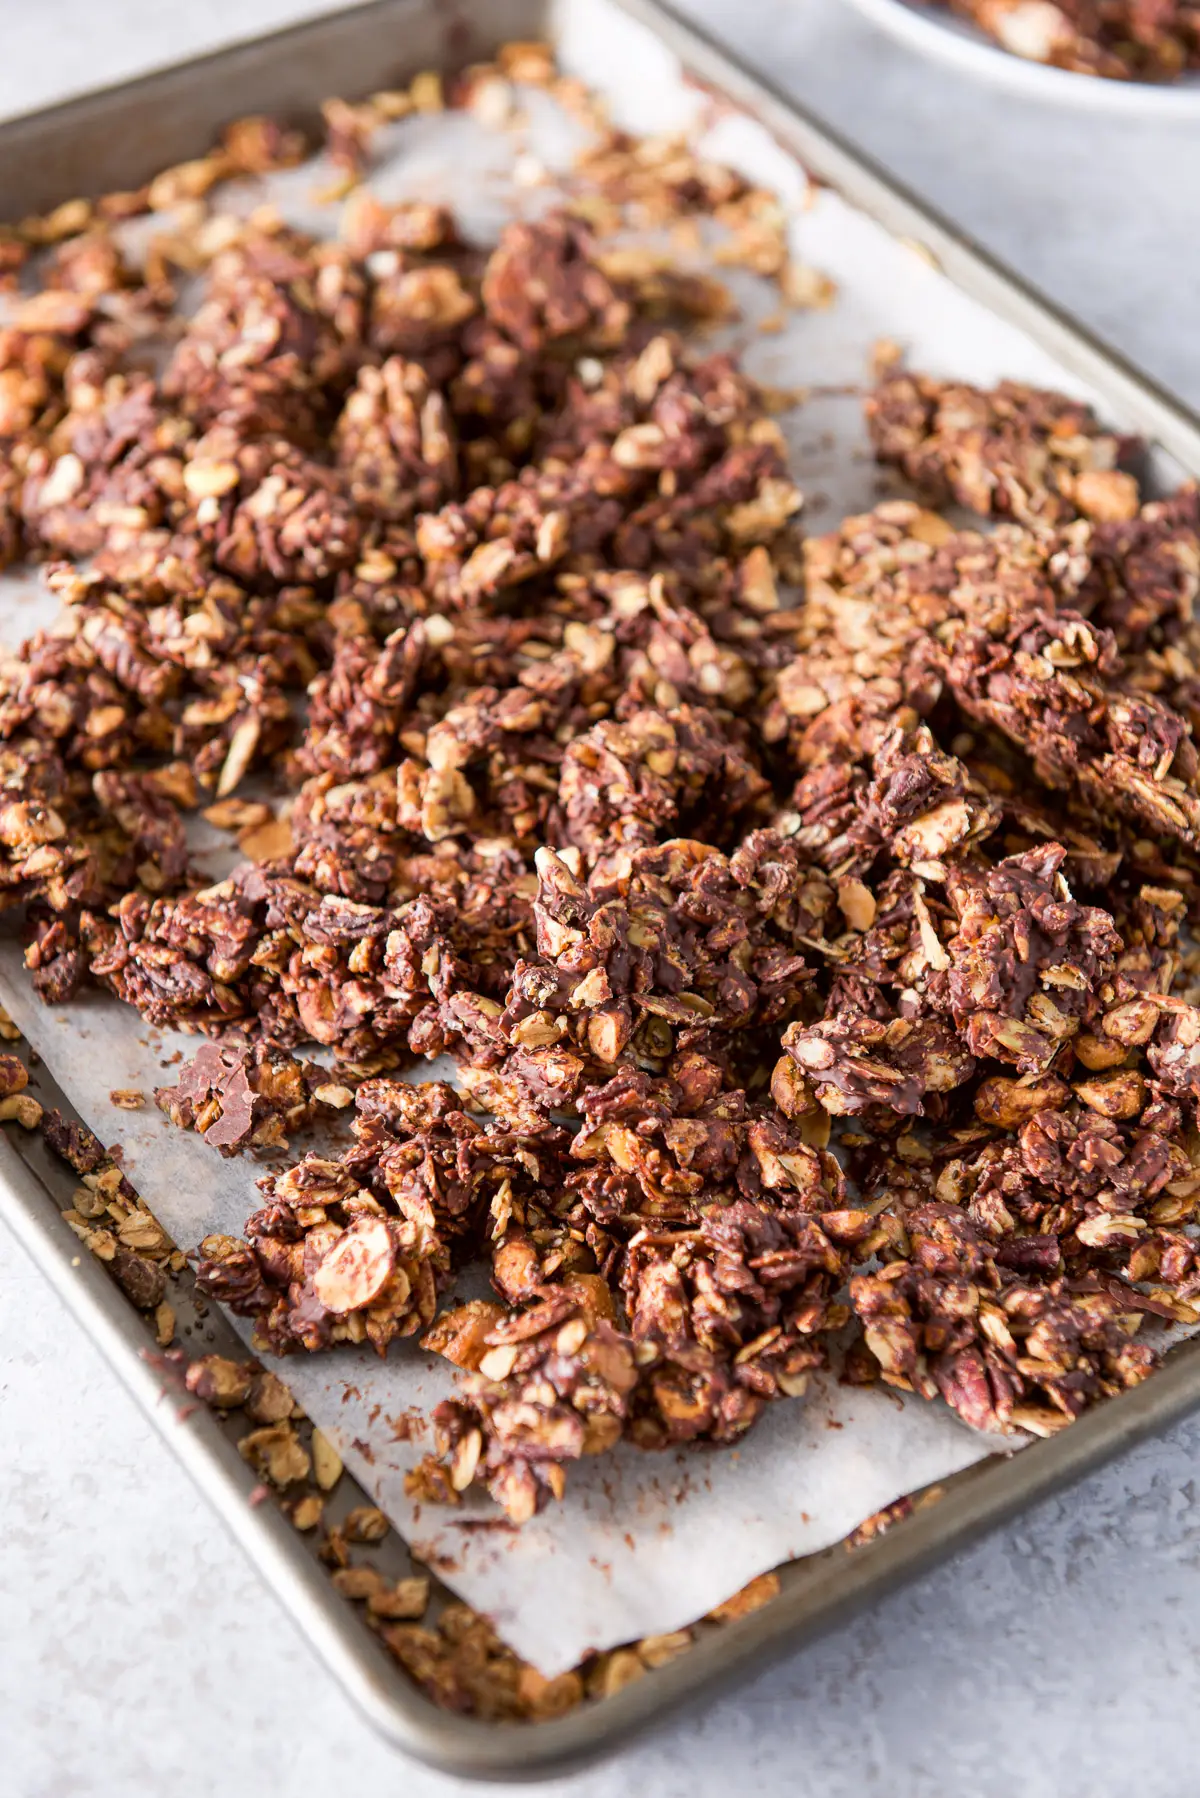 The chocolate firmed up on the granola and broken apart into clusters